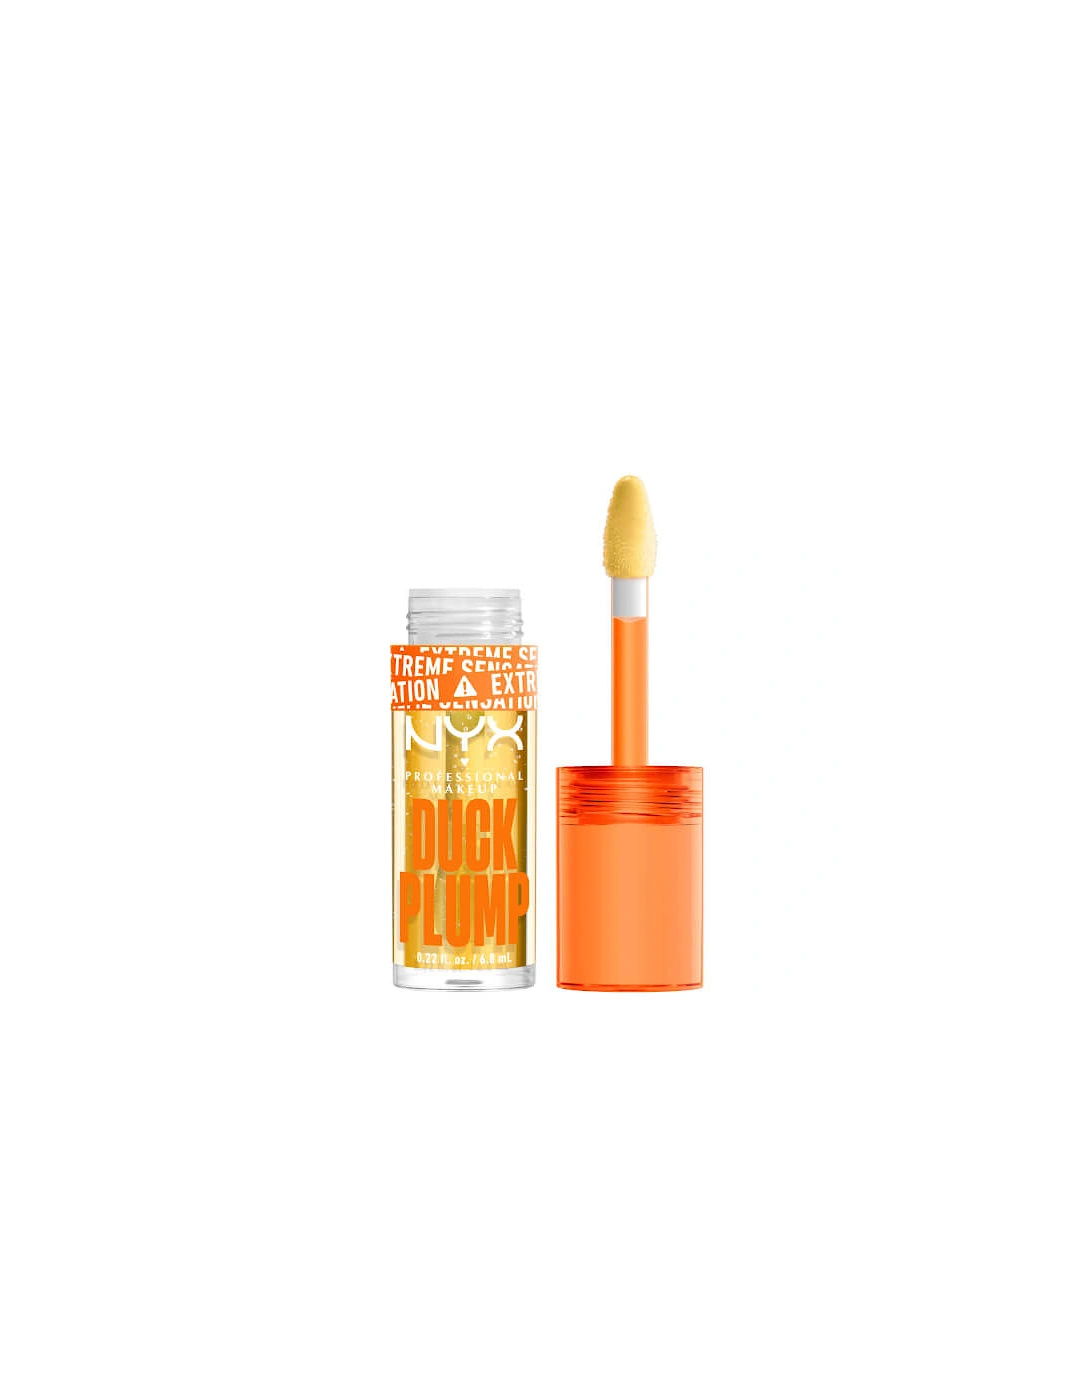 Duck Plump Lip Plumping Gloss - Clearly Spicy, 2 of 1